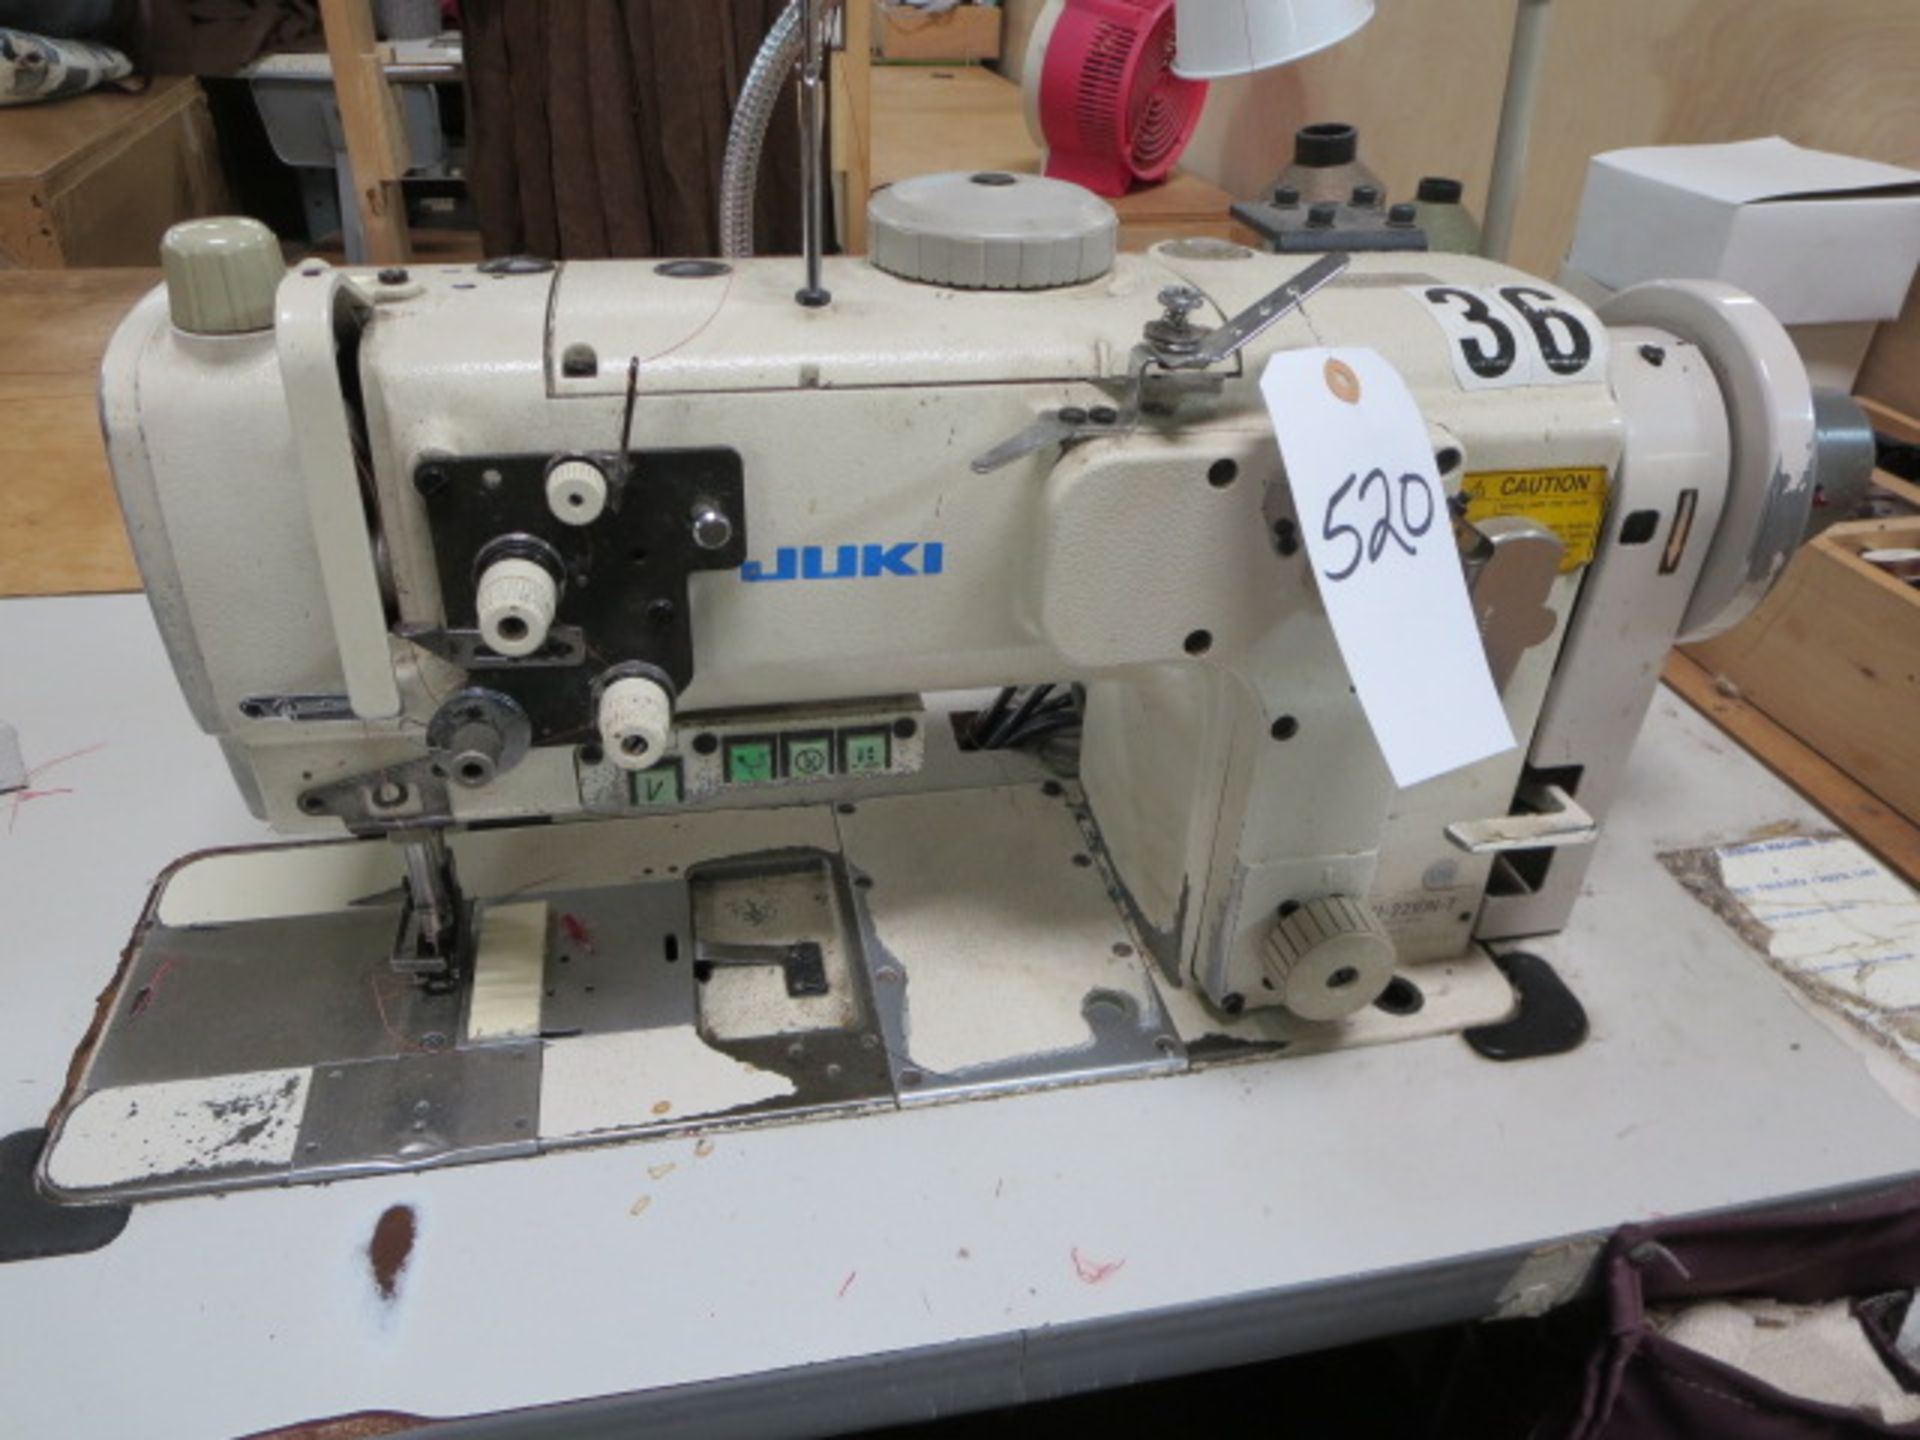 Juki Sewing Machine, model LU-2210N-7, Includes Contents of Sewing Station